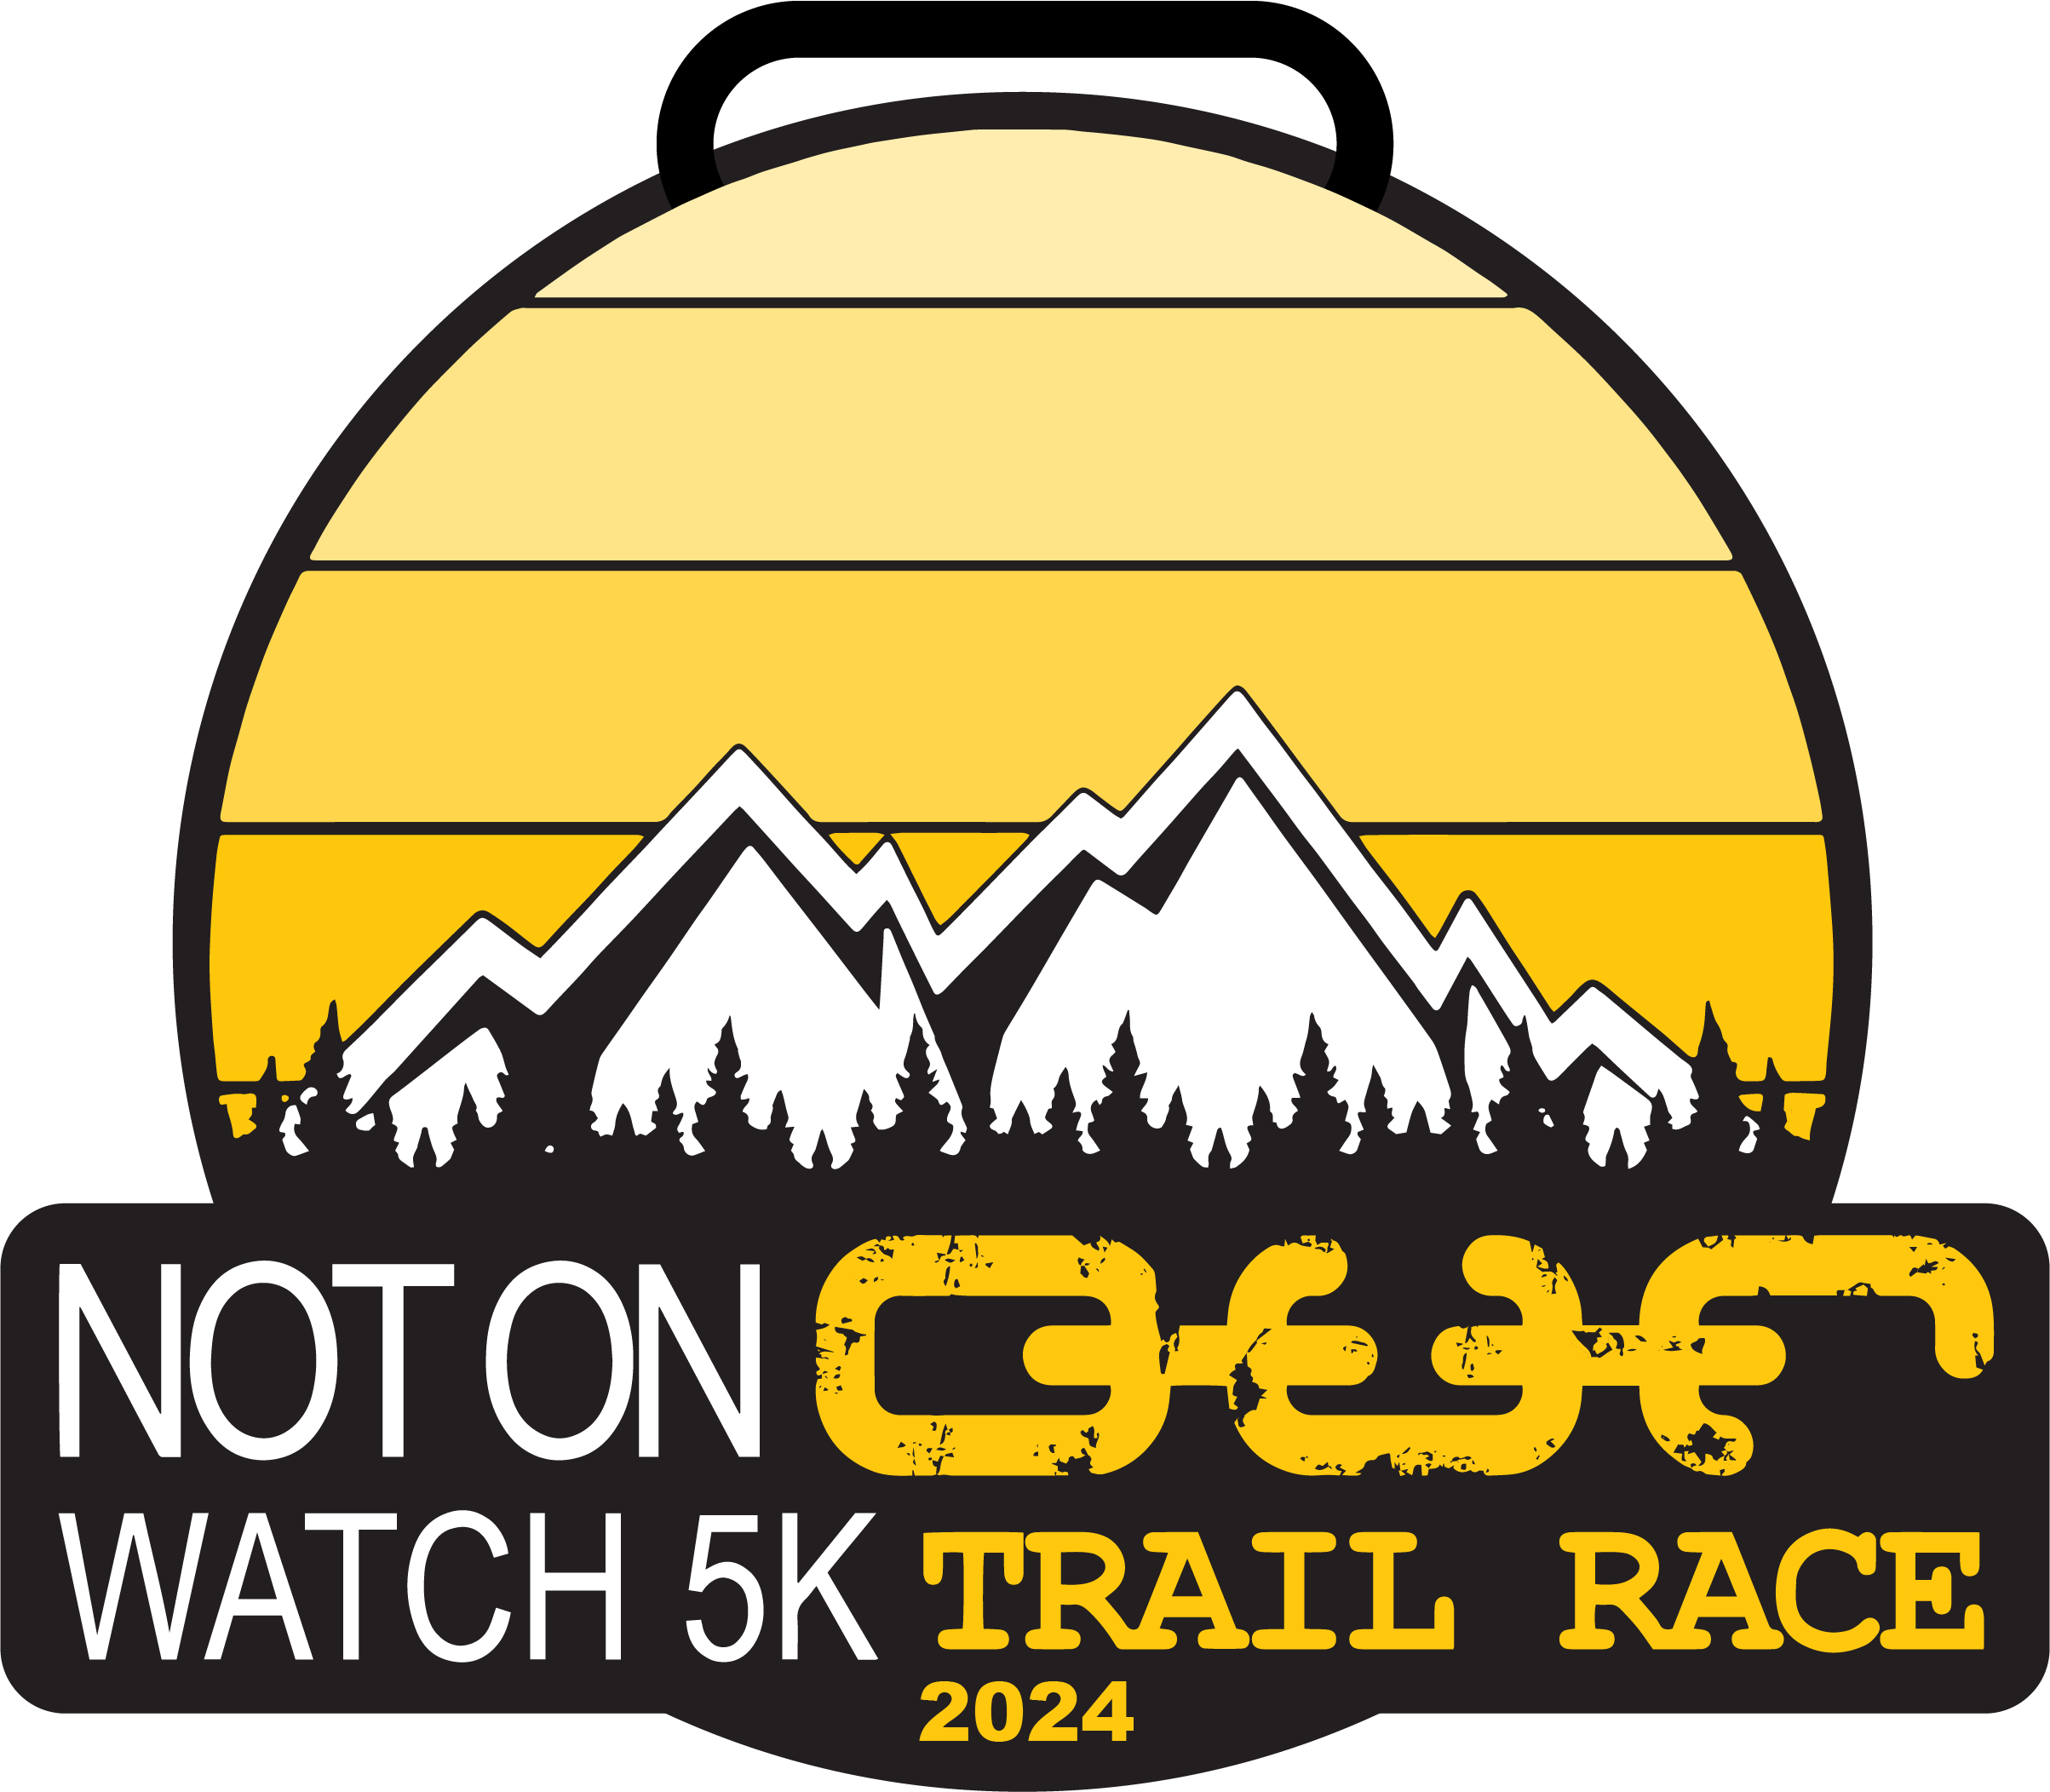 Not on OUR Watch Trail Race 5K logo on RaceRaves